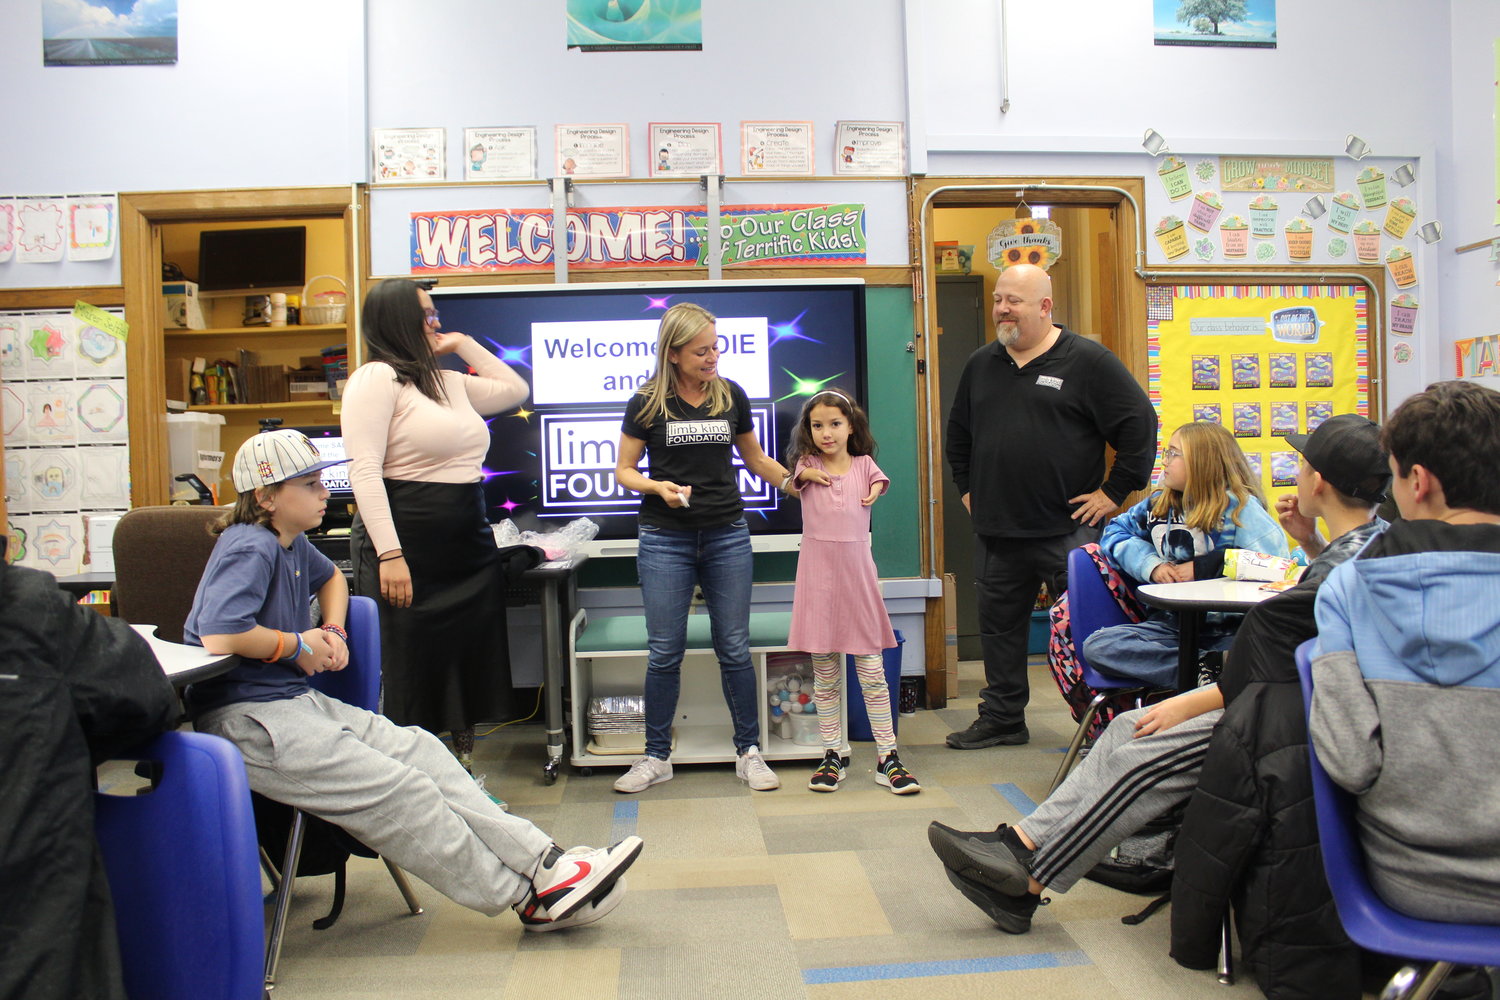 Students from Oceanside Elementary School No. 3 had a thoughtful discussion about how   differences don’t define an individual with Sadie McGill, 8. She was joined by members of the Limb Kind Foundation, with Jill Smith and founder Robert Schulman.